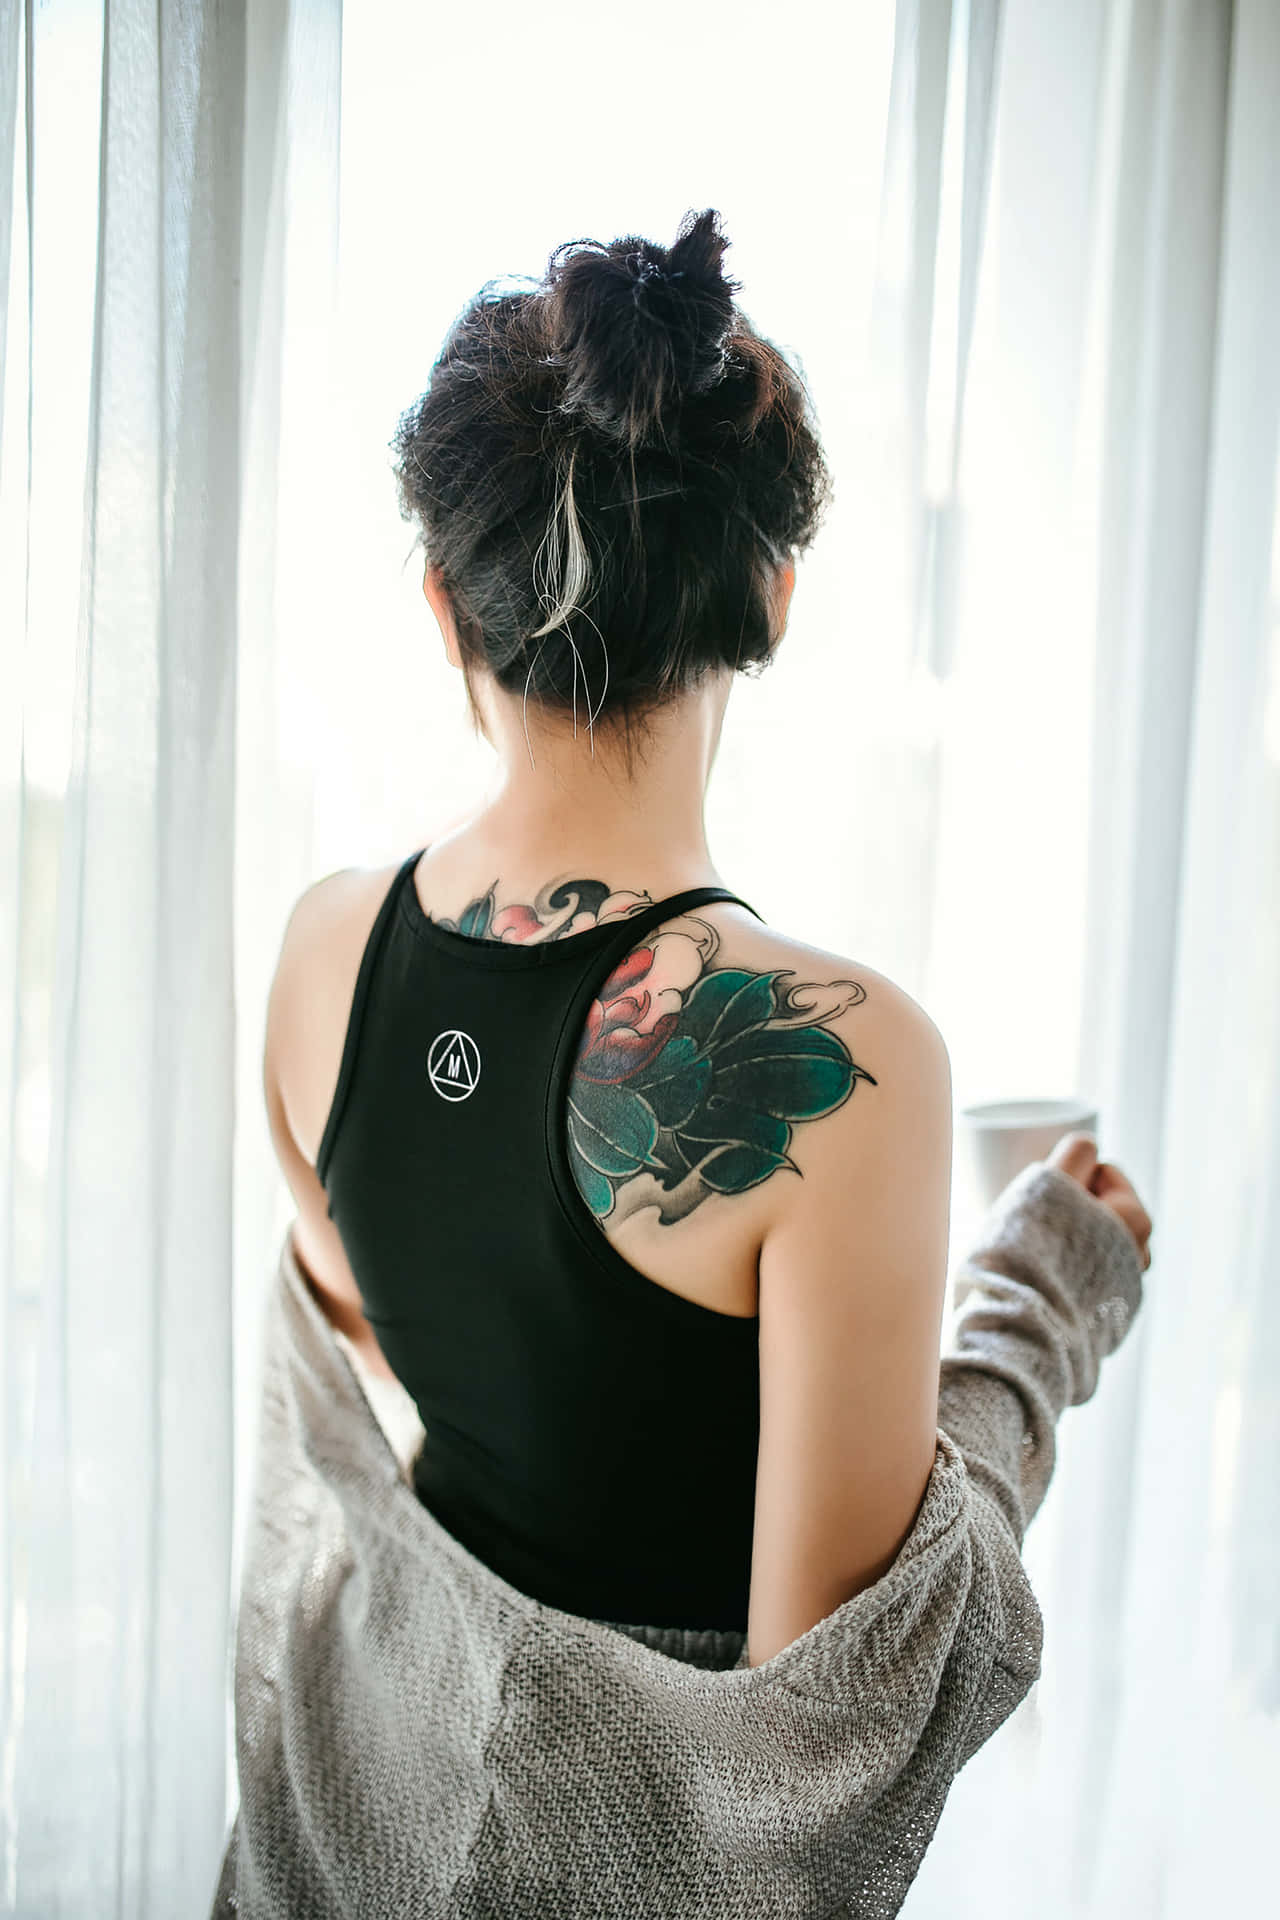 A tattooed girl showing off her detailed art